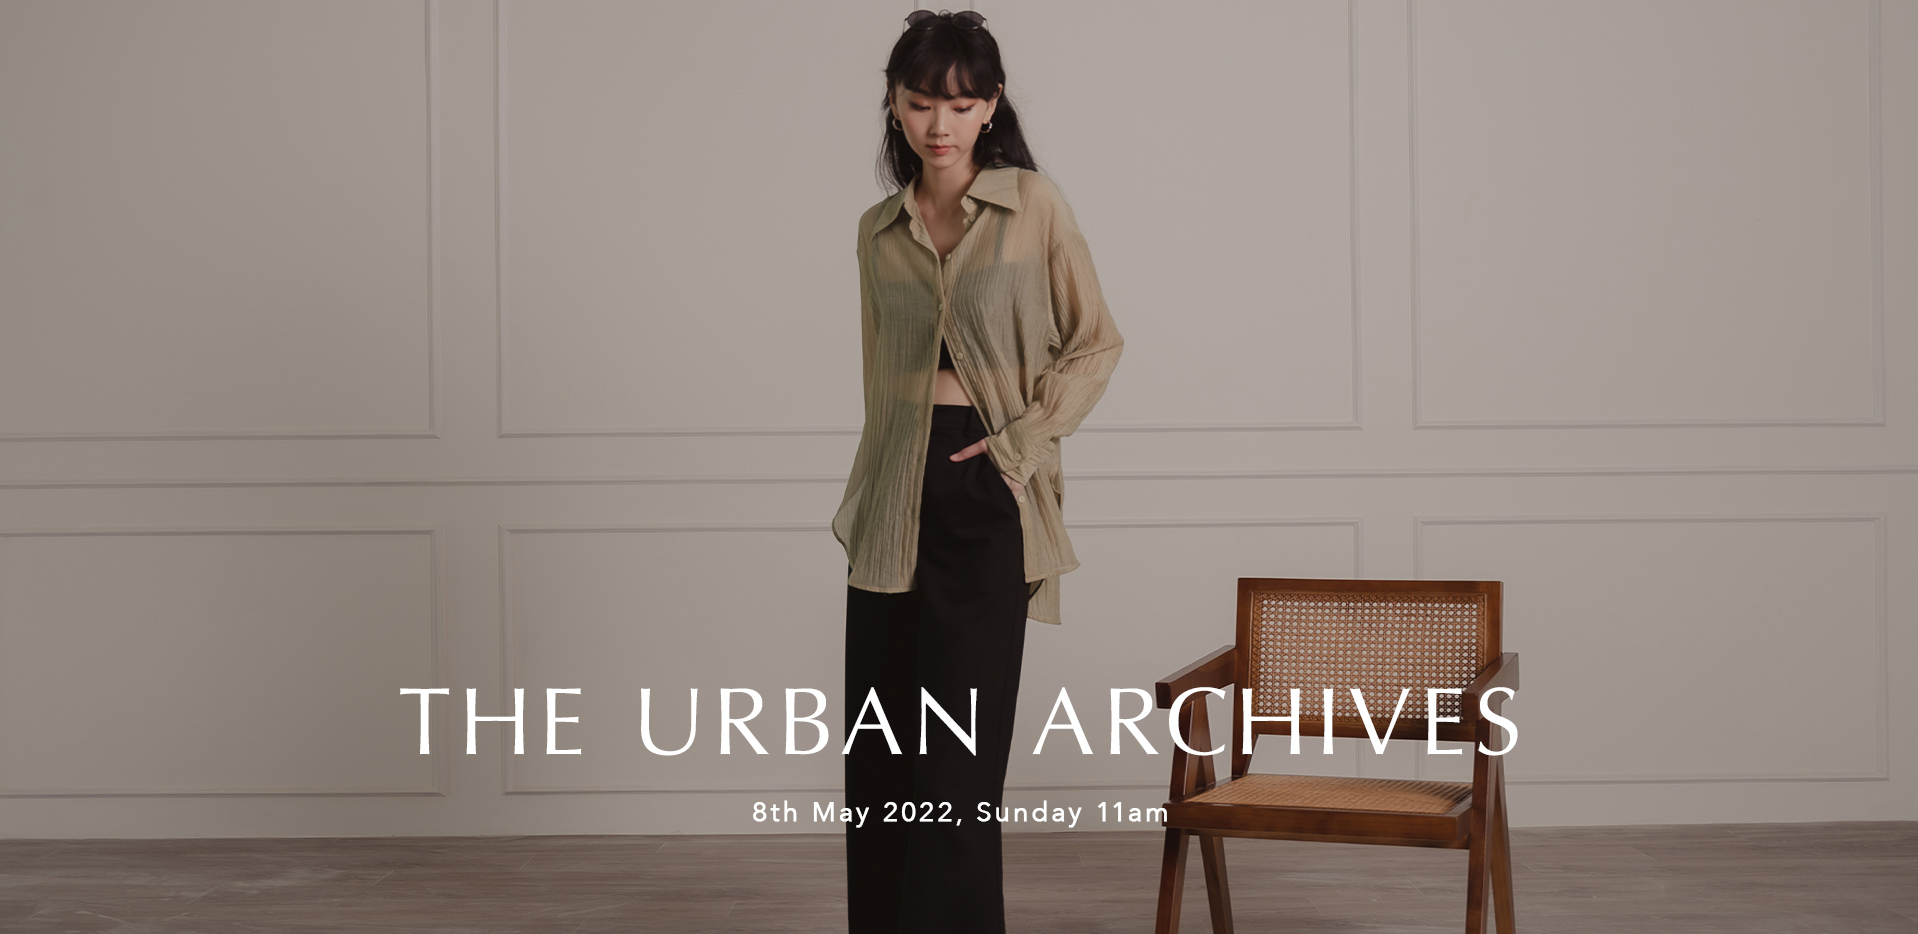 THE URBAN ARCHIVES